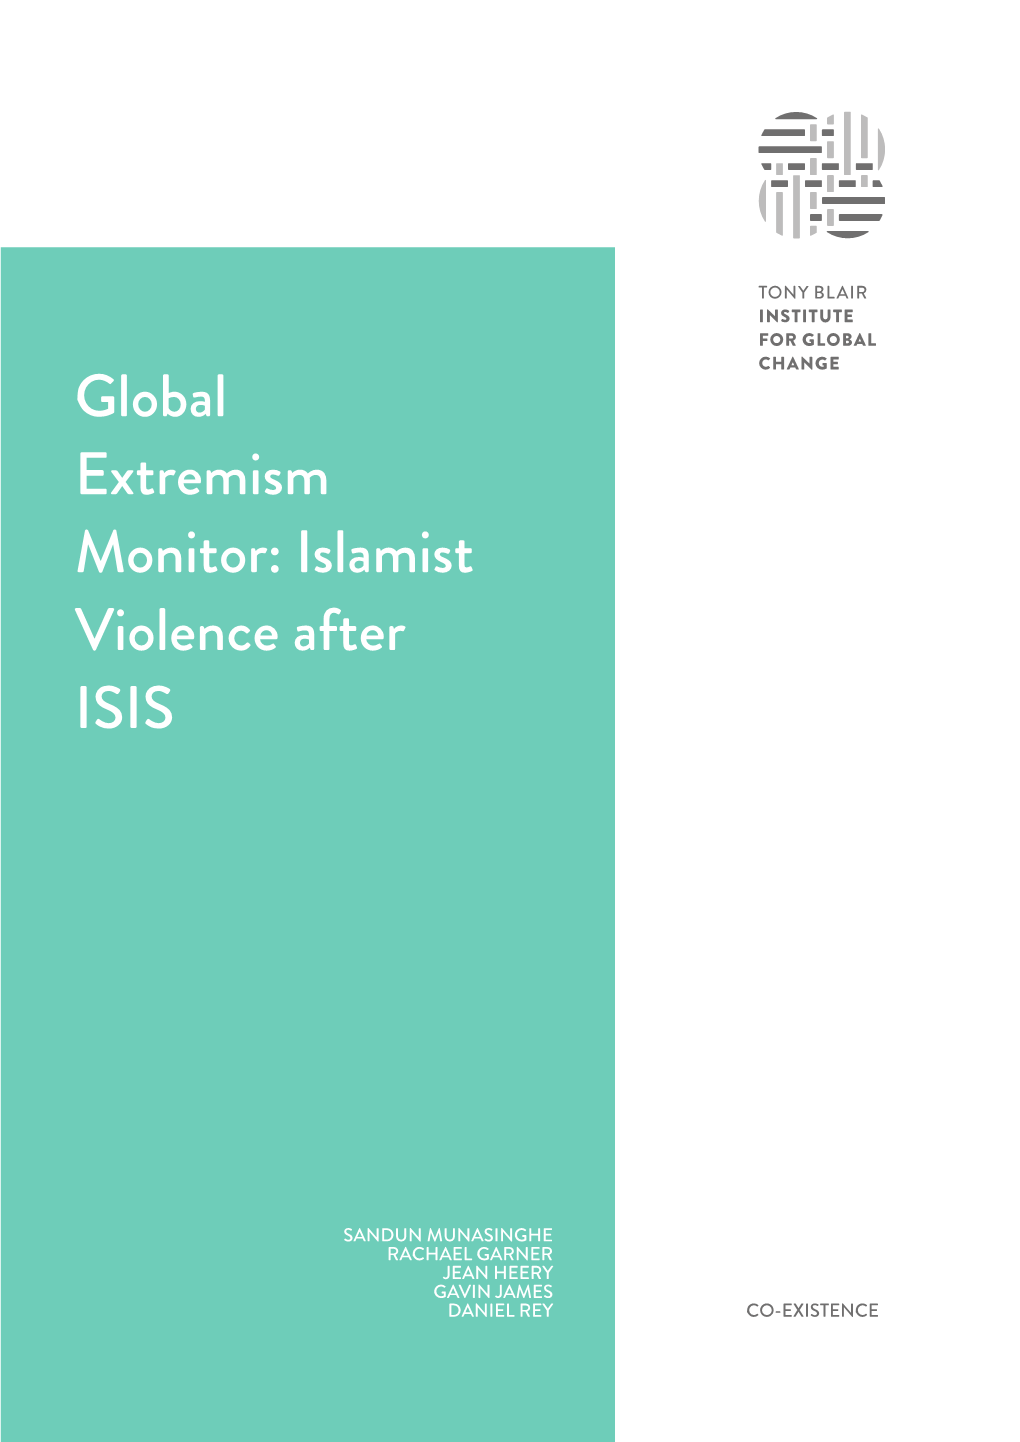 Global Extremism Monitor: Islamist Violence After ISIS